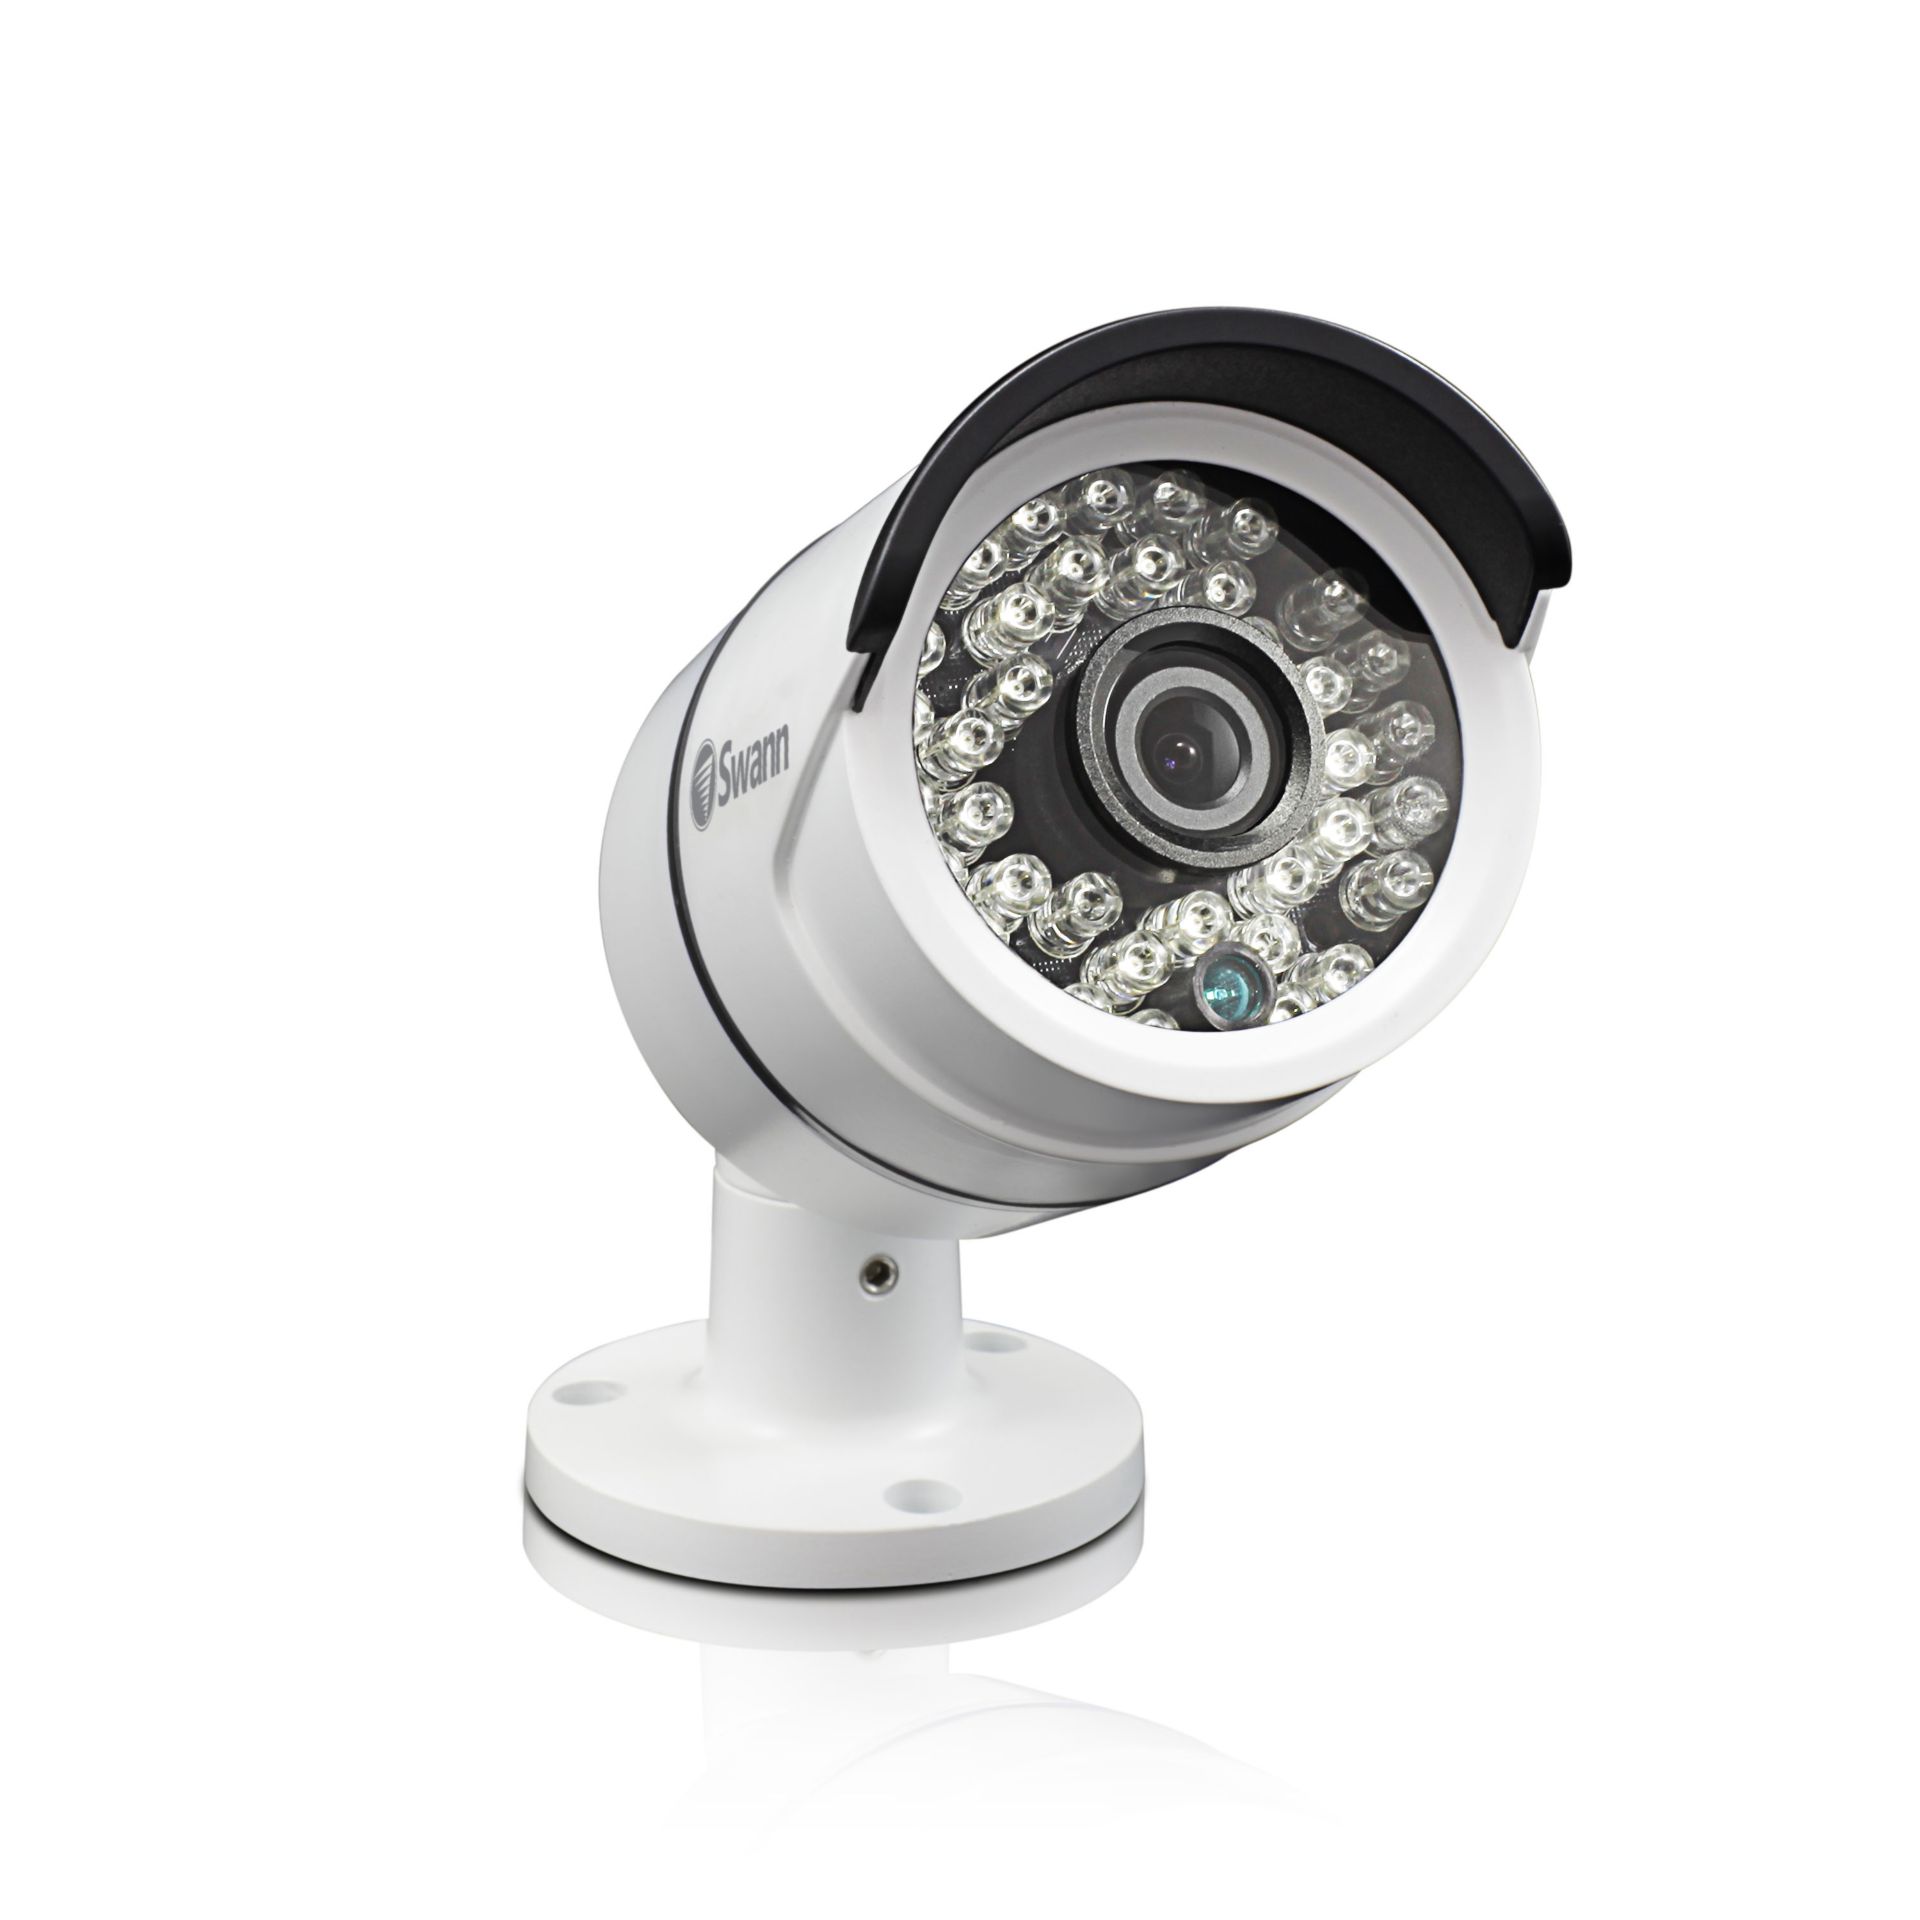 V Grade A Swann Pro H855 Professional Full HD Security Camera - 1080p - 30 Meter Night Vision X 2